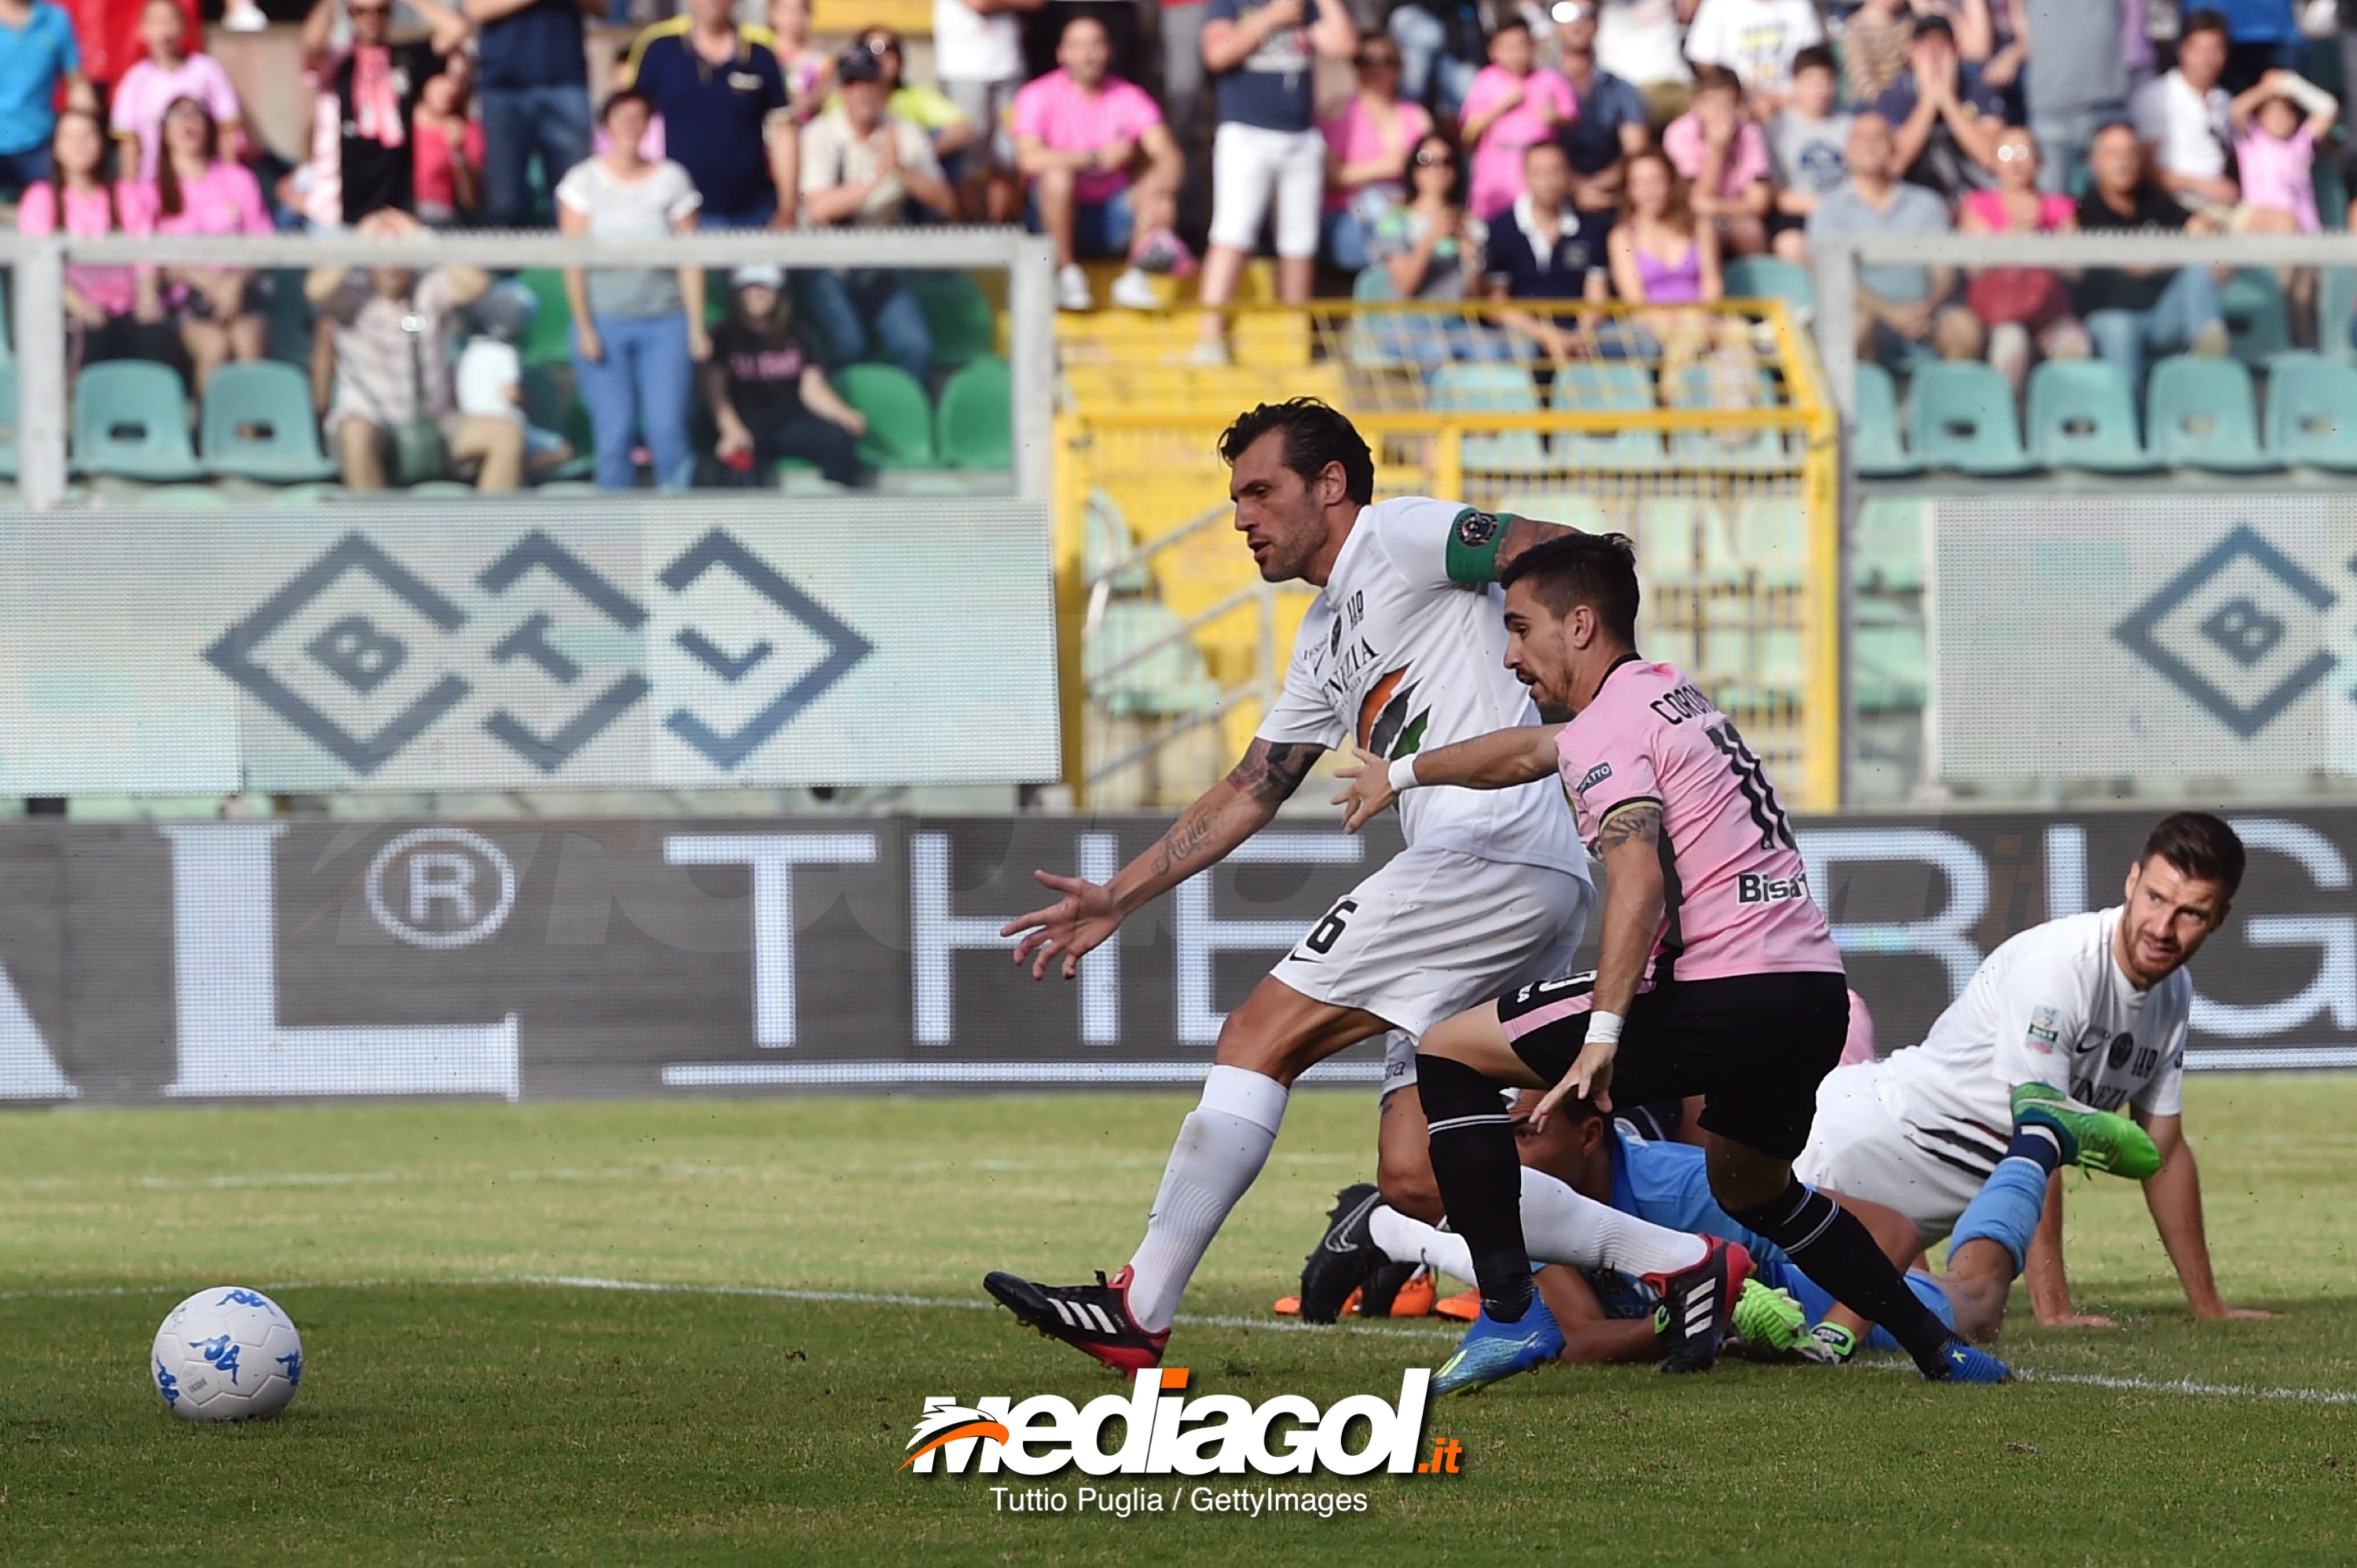 PALERMO, ITALY - JUNE 10: Maurizio Domizzi (L) of Venezia scores an own goal during the serie B playoff match between US Citta di Palermo and Venezia FC at Stadio Renzo Barbera on June 10, 2018 in Palermo, Italy.  (Photo by Tullio M. Puglia/Getty Images)